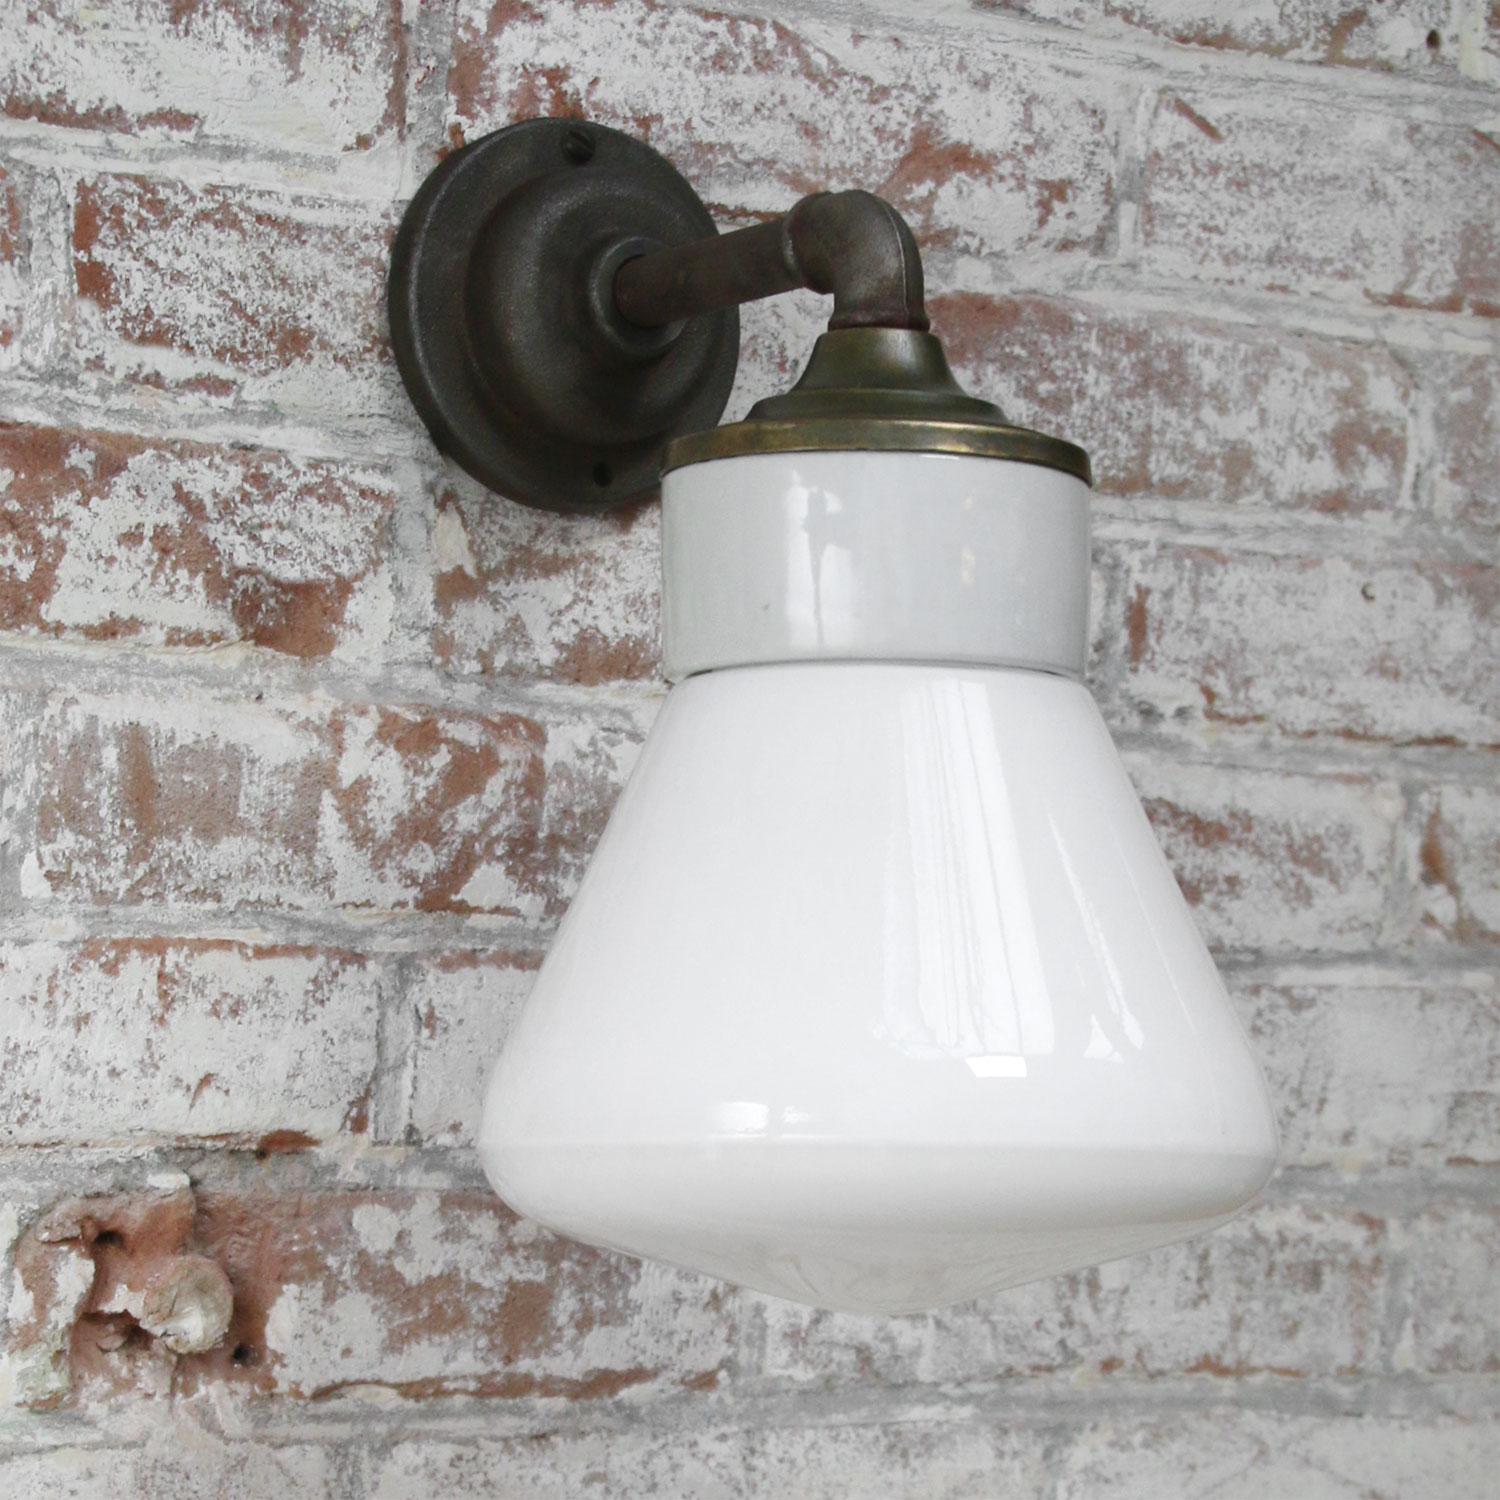 Porcelain industrial wall lamp.
White porcelain, brass and cast iron
White opaline milk glass.
2 conductors, no ground.

Diameter wall mount 10.5 cm / 4”.
2 holes to secure.

For use inside only

Weight: 2.05 kg / 4.5 lb

Priced per individual item.